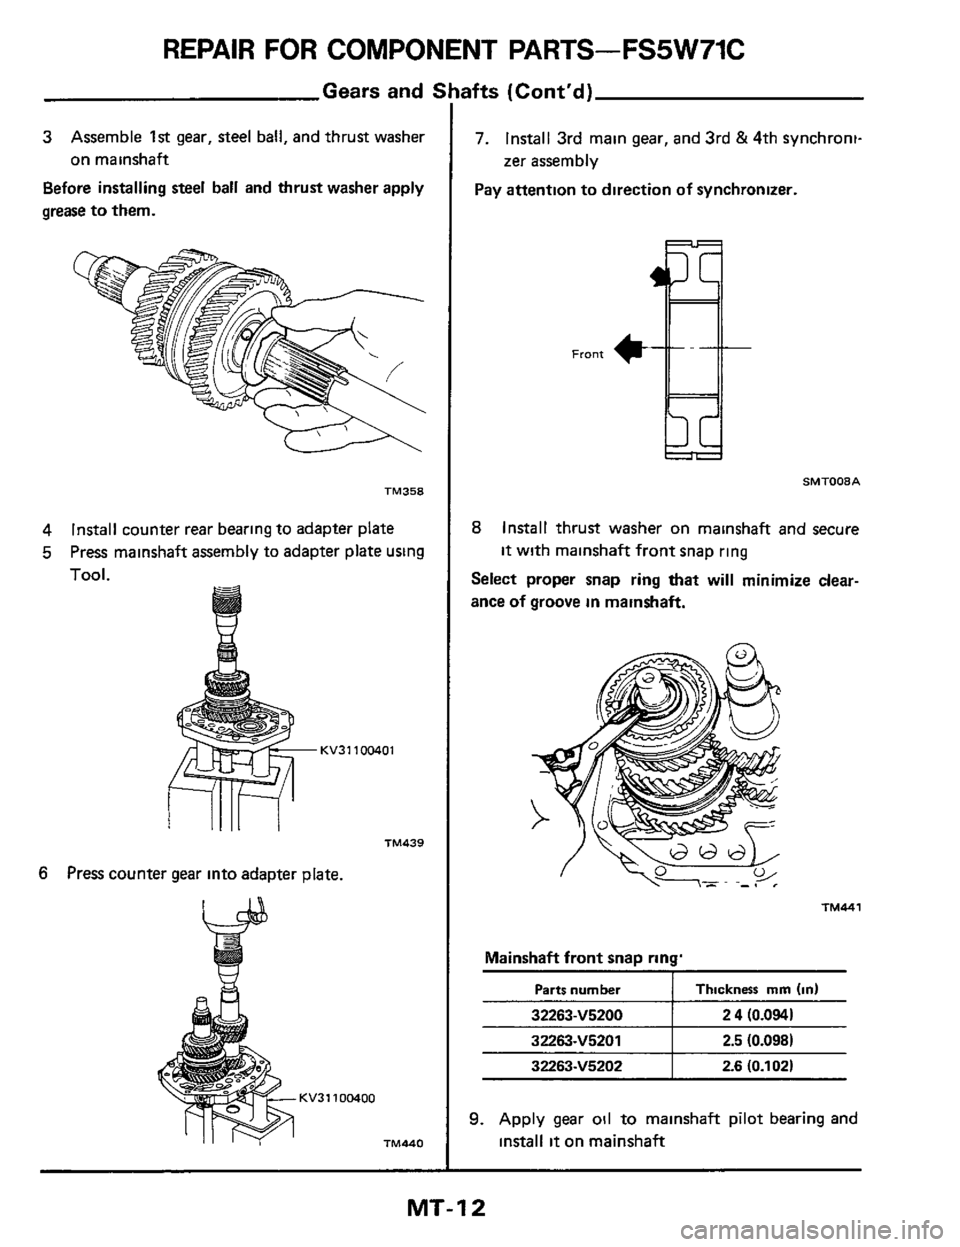 NISSAN 300ZX 1984 Z31 Manual Transmission User Guide REPAIR FOR COMPONENT PARTS-FS5W71C 
Parts number 
Gears  and 5 
Thickness  mm (in) 
3 Assemble 1st gear, steel ball,  and thrust  washer 
on mainshaft 
Before 
installing steel  ball and thrust  washe